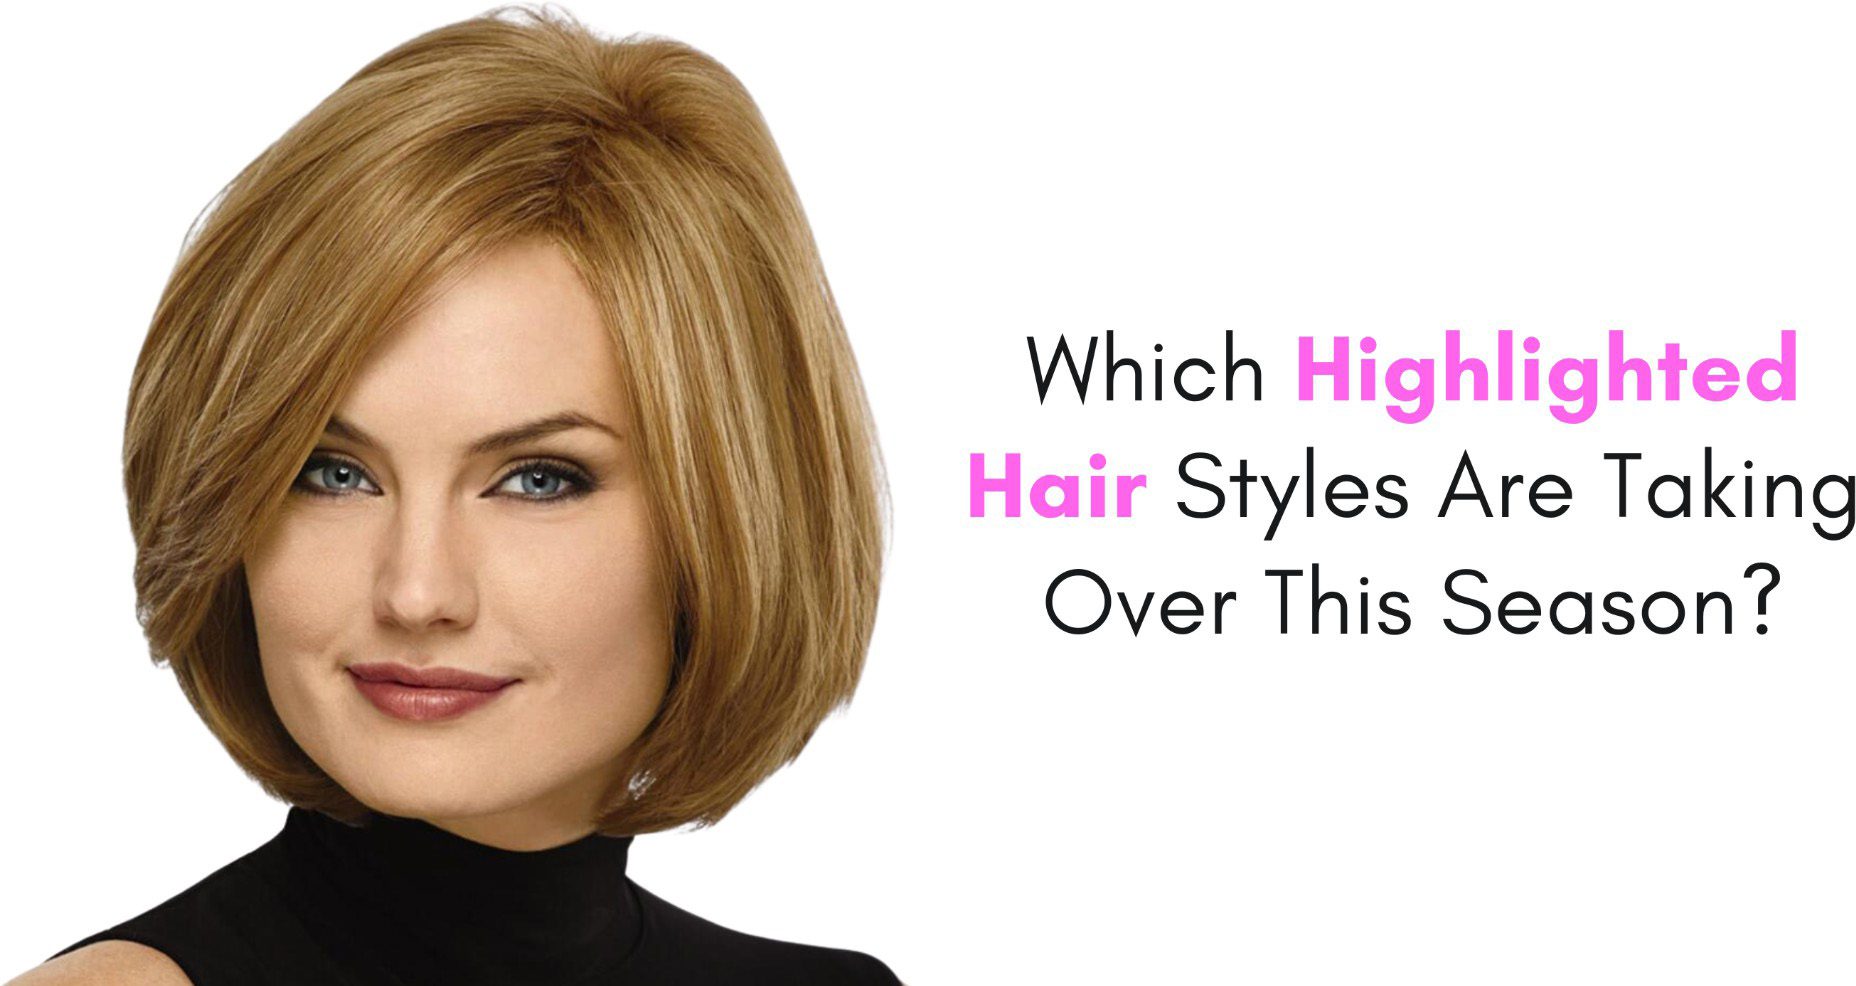 Which Highlighted Hair Styles Are Taking Over This Season?